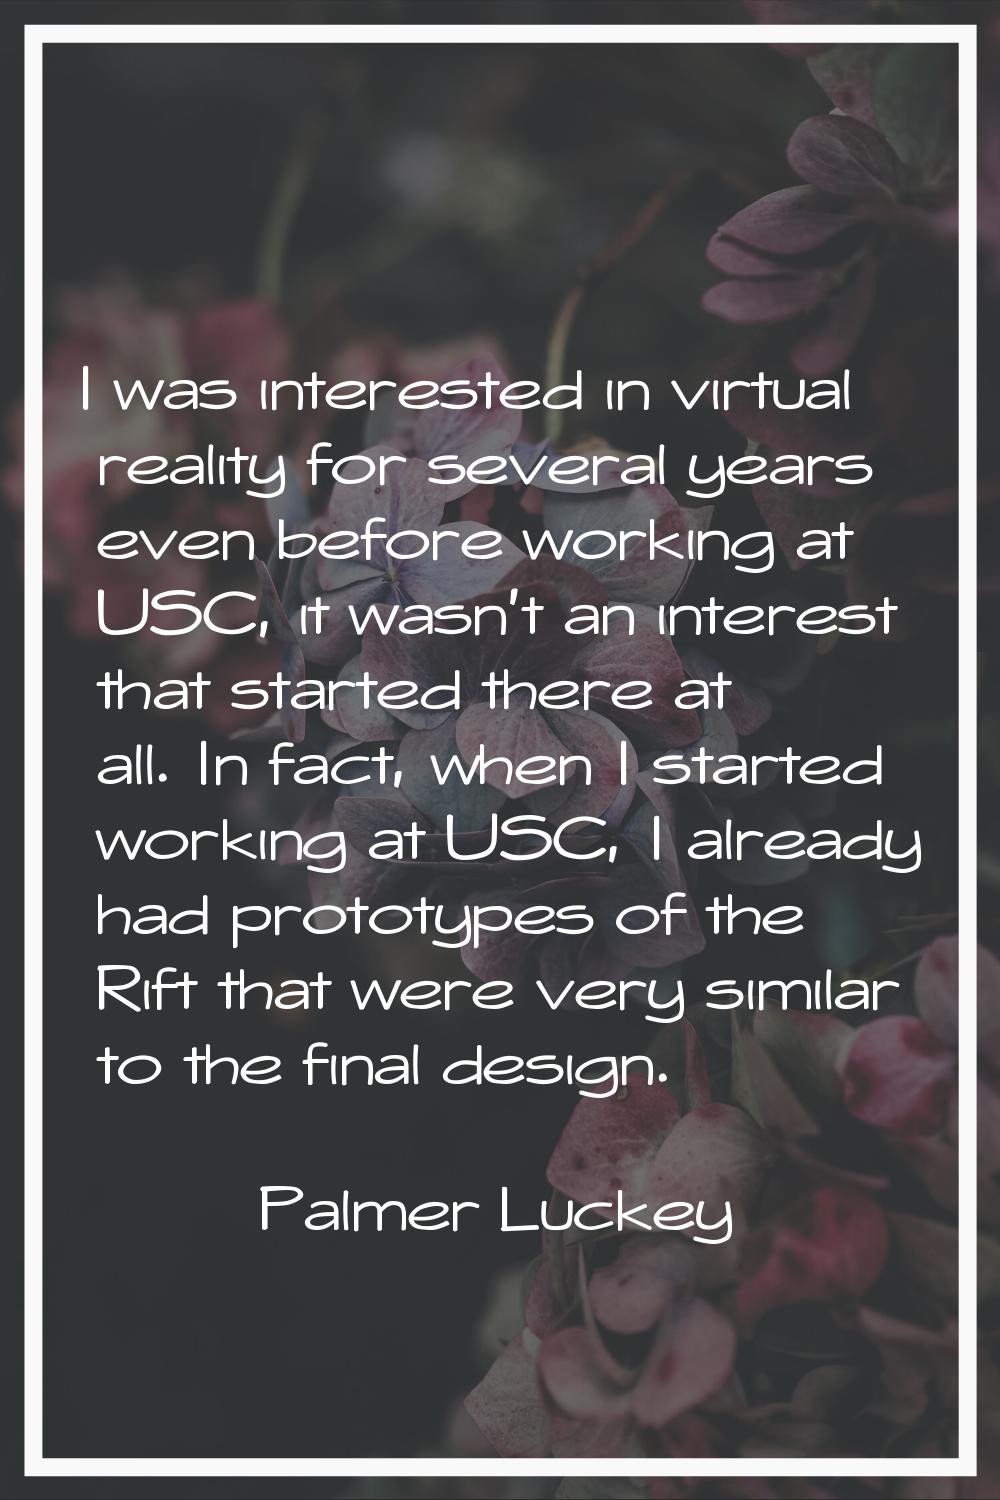 I was interested in virtual reality for several years even before working at USC, it wasn't an inte